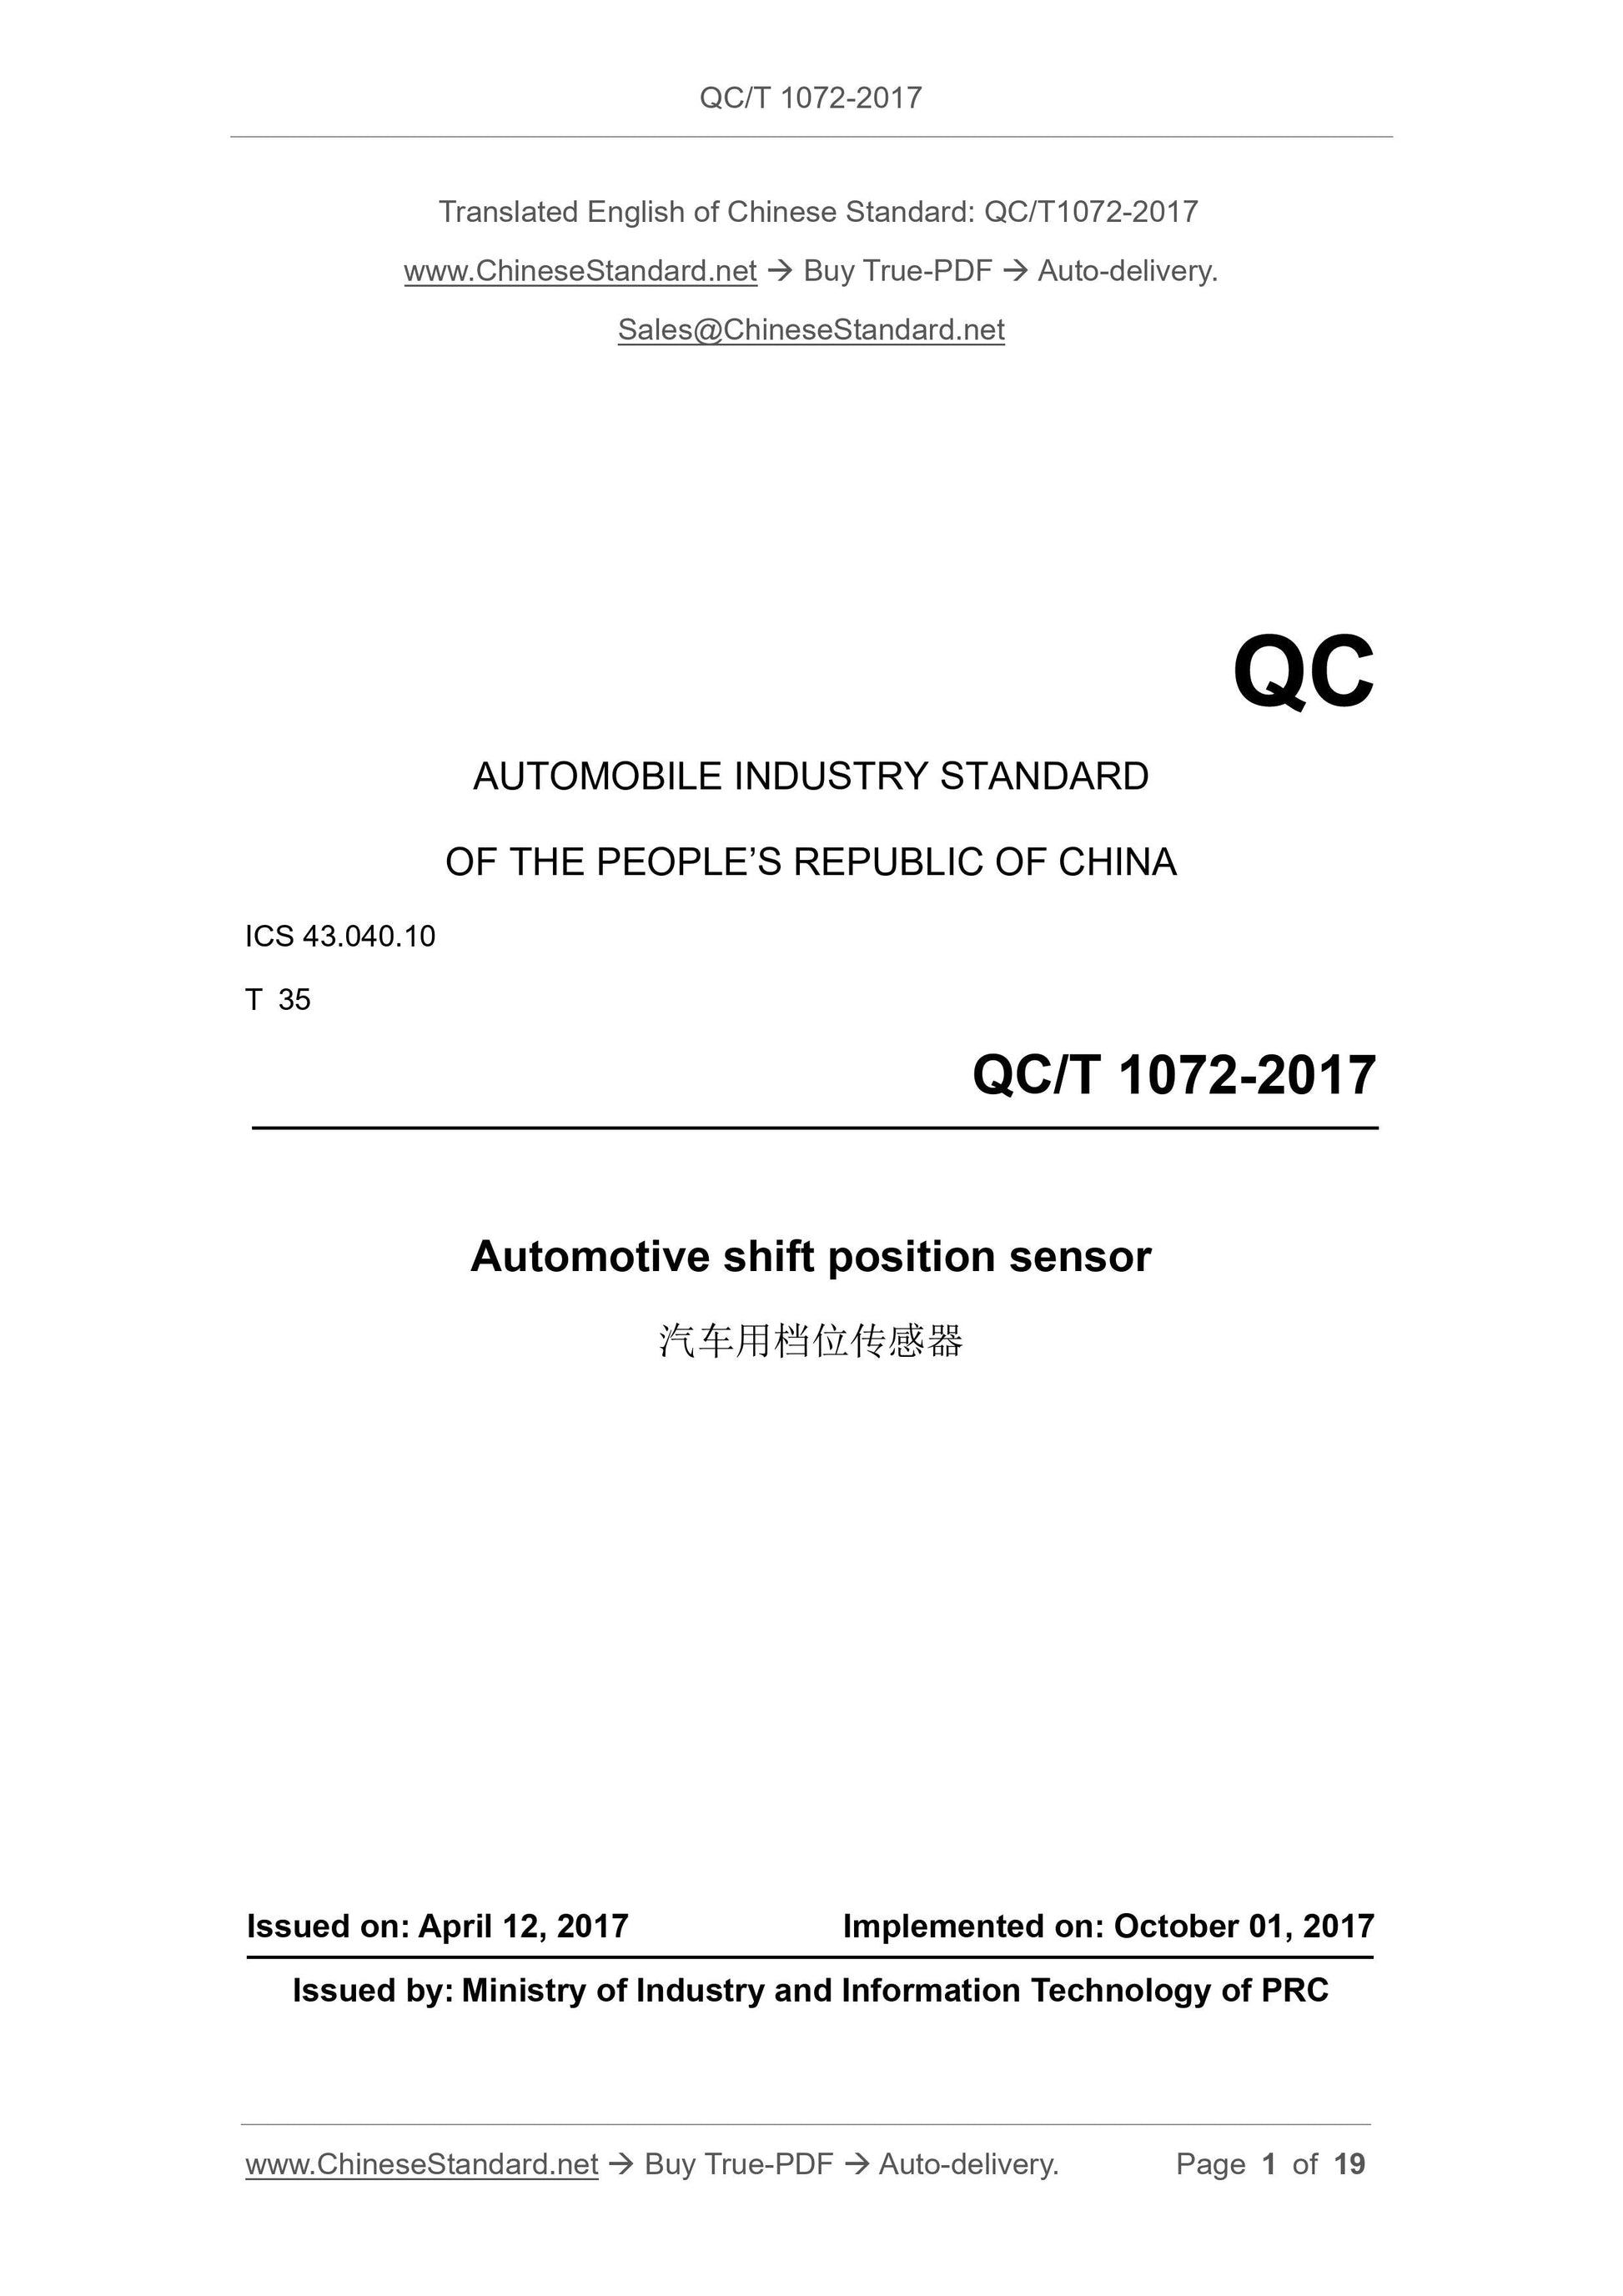 QC/T 1072-2017 Page 1